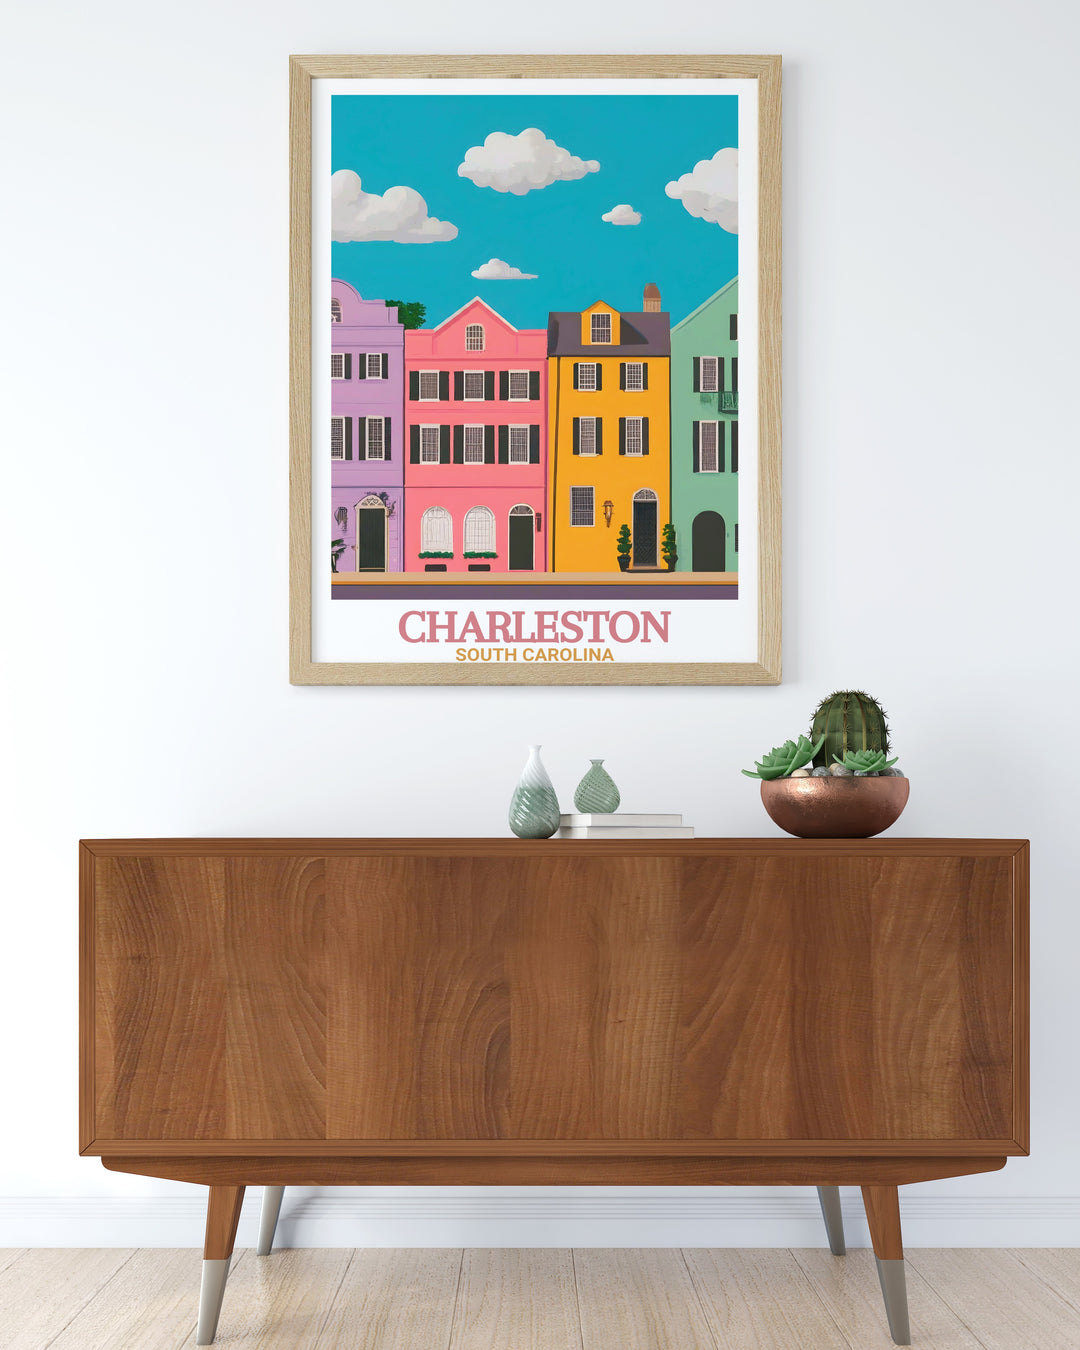 Elegant Rainbow Row vintage print featuring the picturesque scenery and colorful houses of Charleston perfect for anniversary gifts birthday gifts or Christmas gifts for those who love Charleston